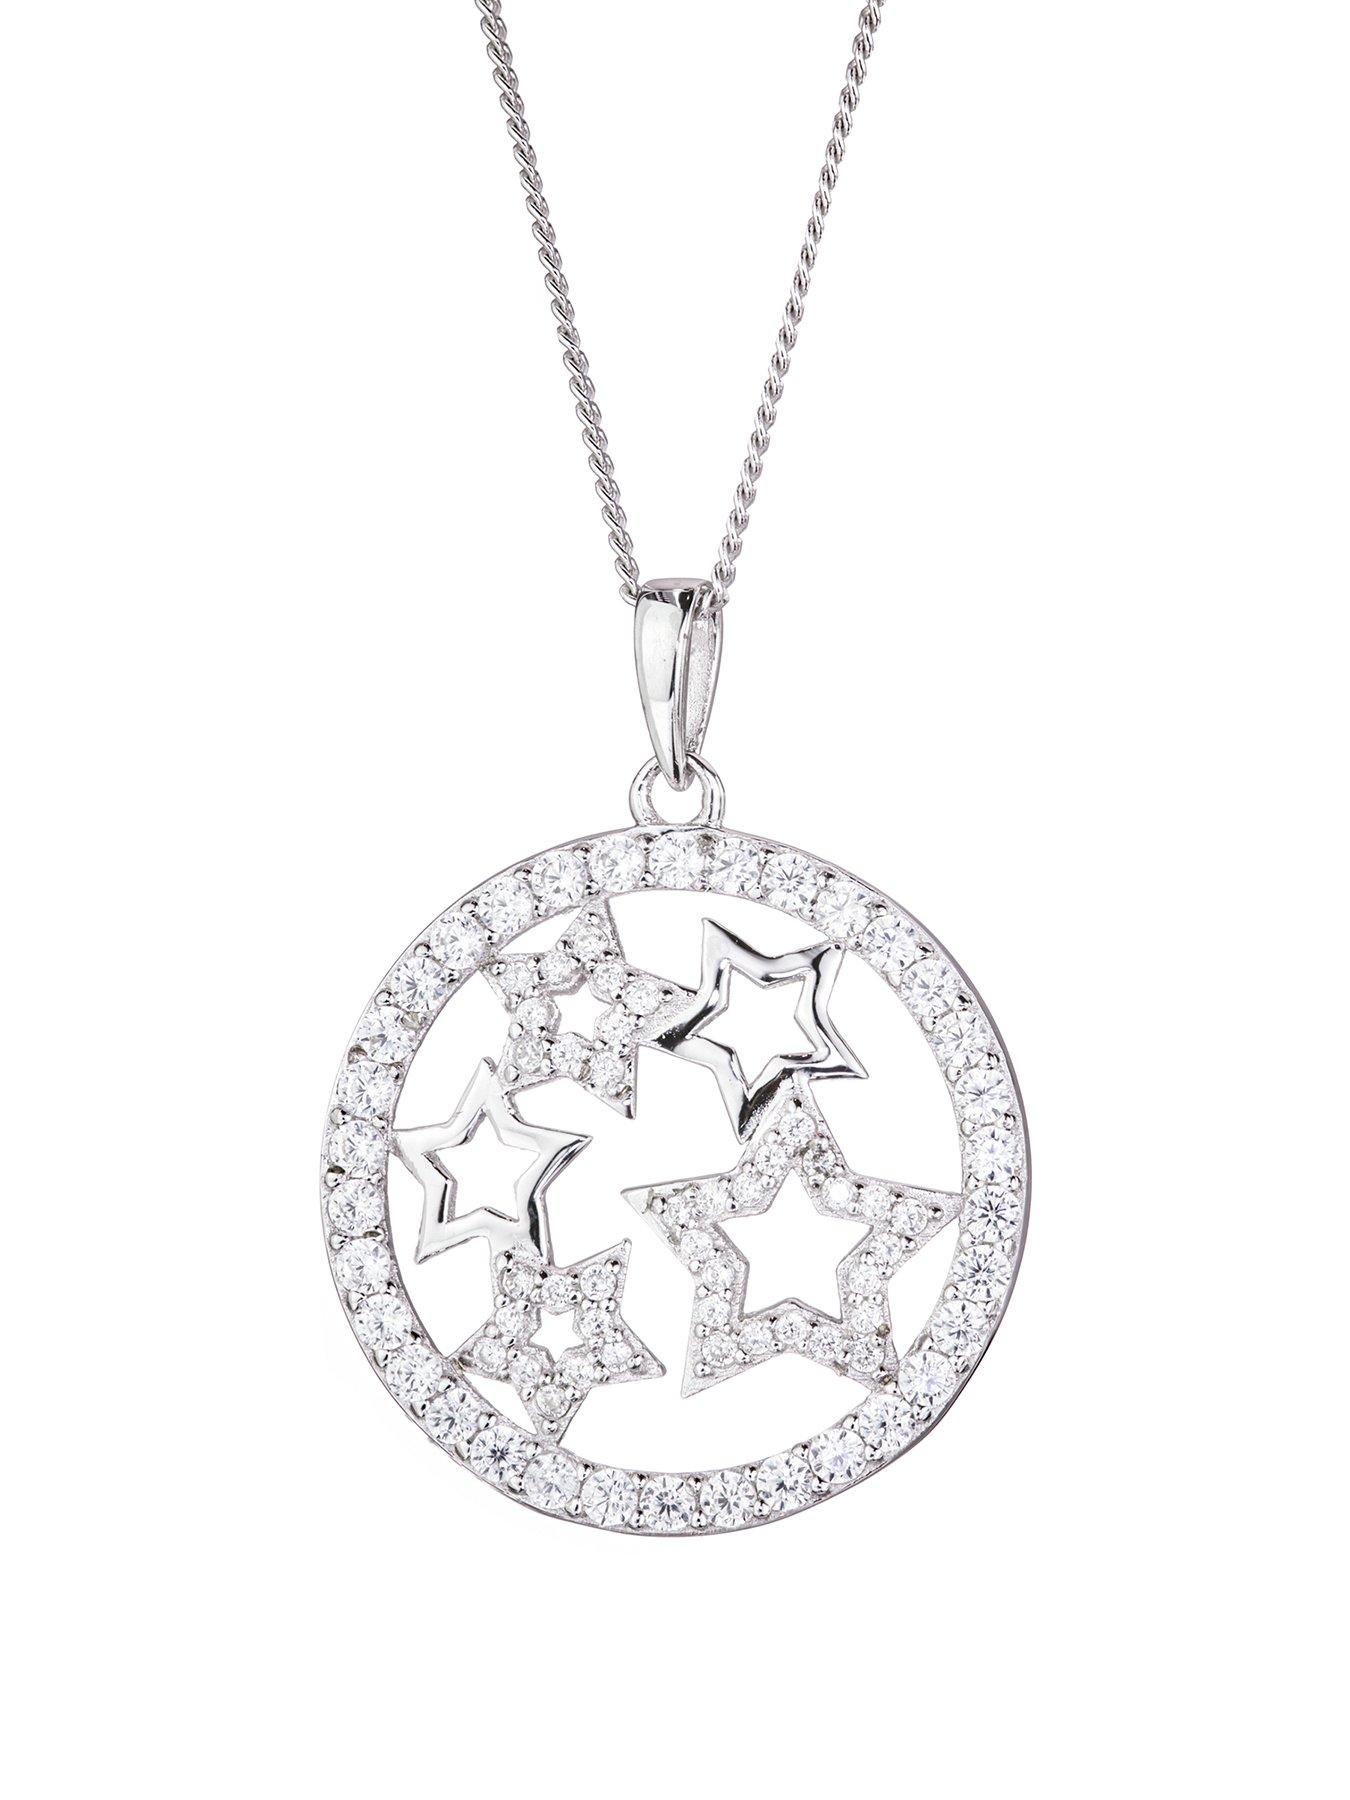 Dainty Star Charm Belcher Chain Gift for Women Sterling Silver Pendant Necklace